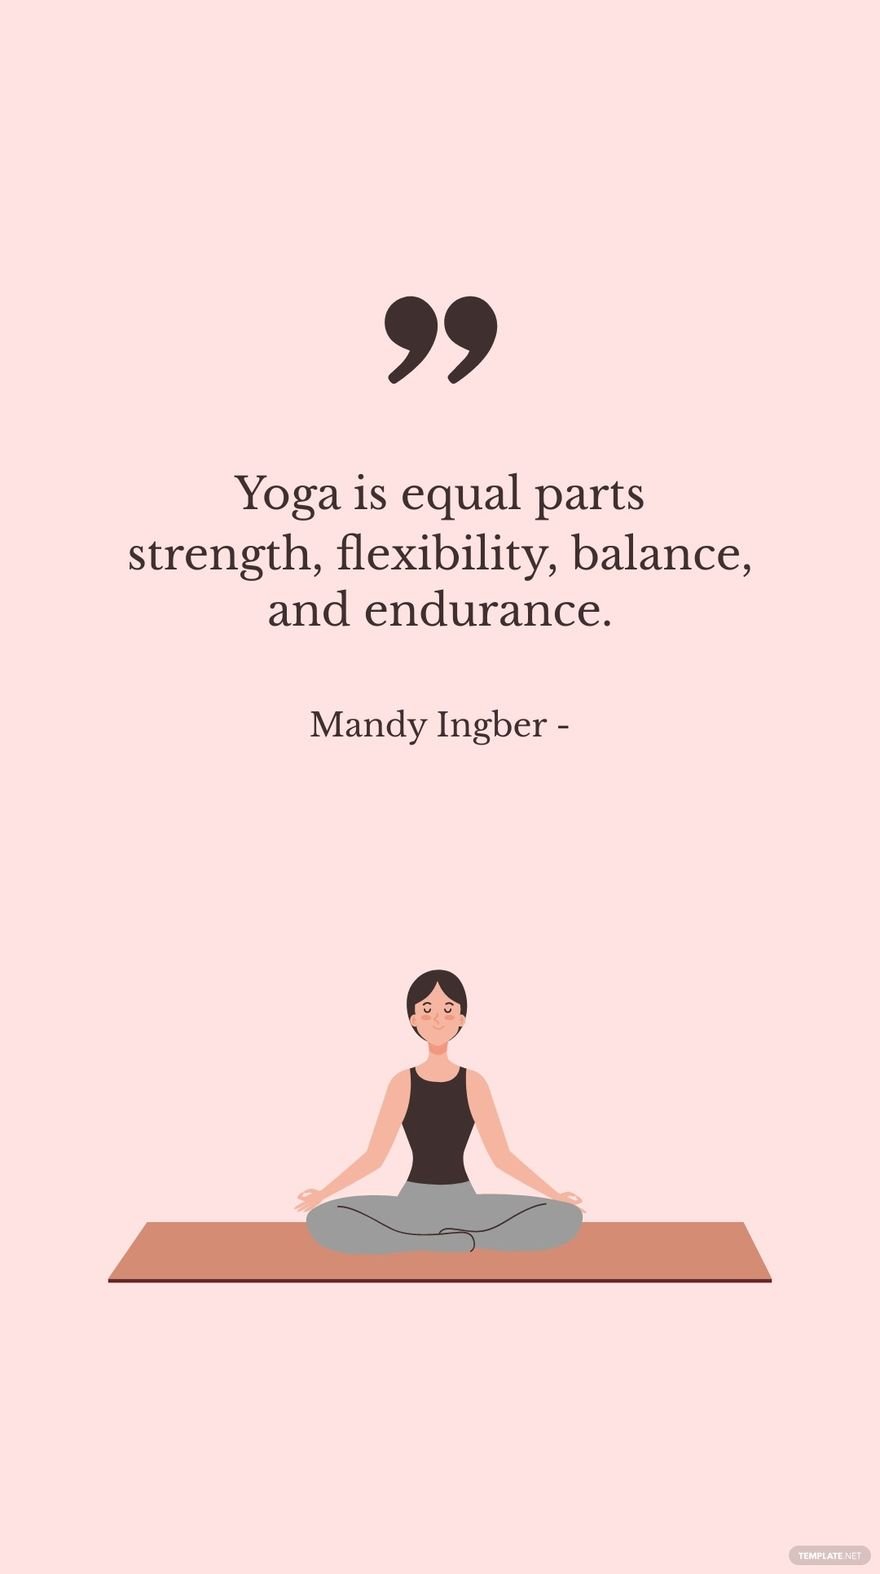 Mandy Ingber - Yoga is equal parts strength, flexibility, balance, and endurance. in JPG